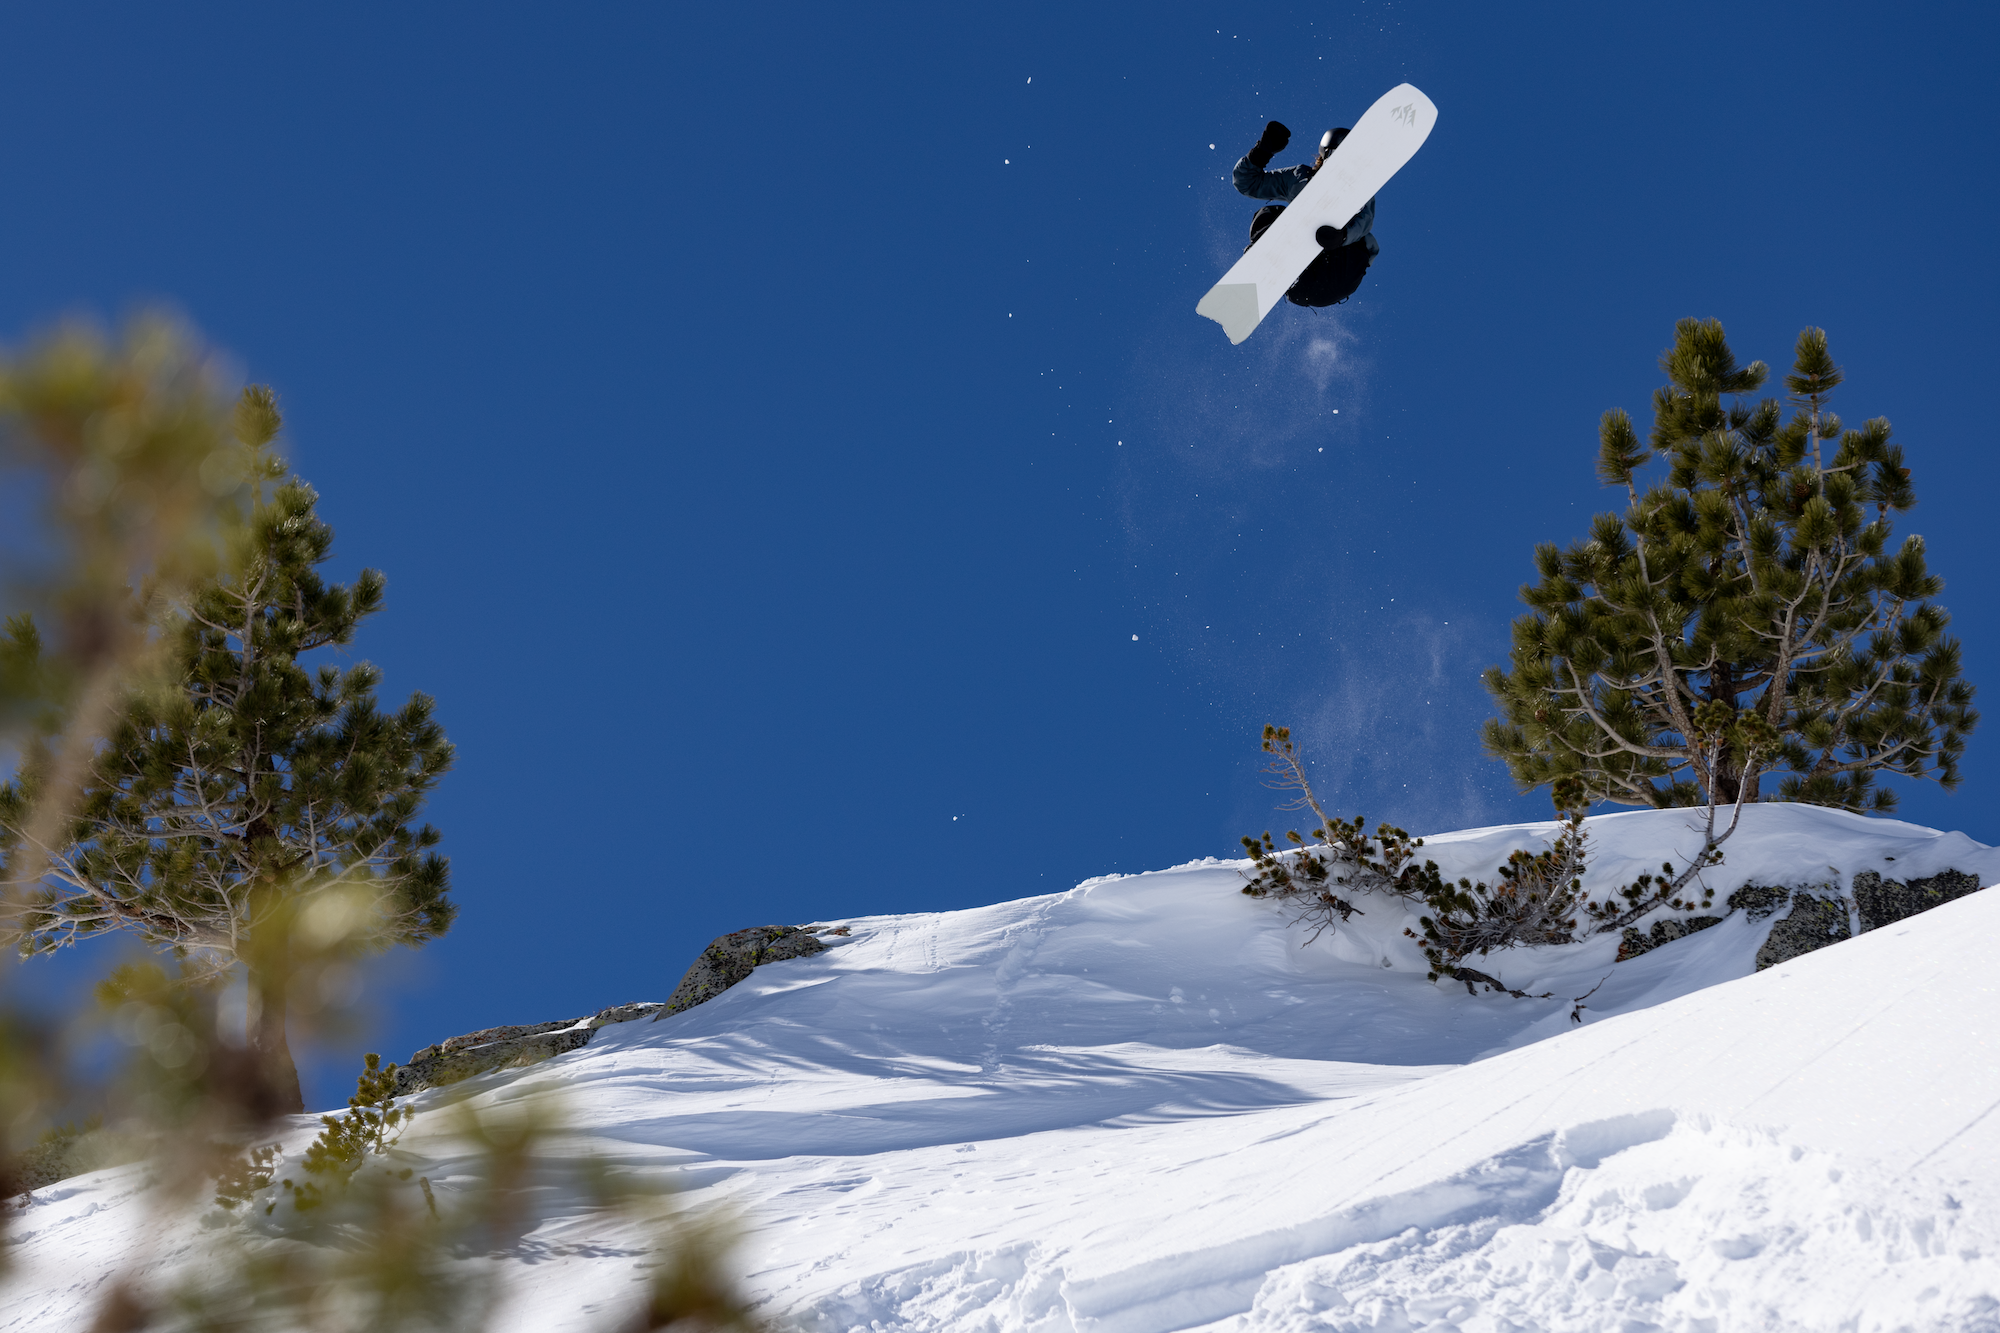 That redesign clearly doesn't mess with your ability to pop | Photo Provided by Jones Snowboards